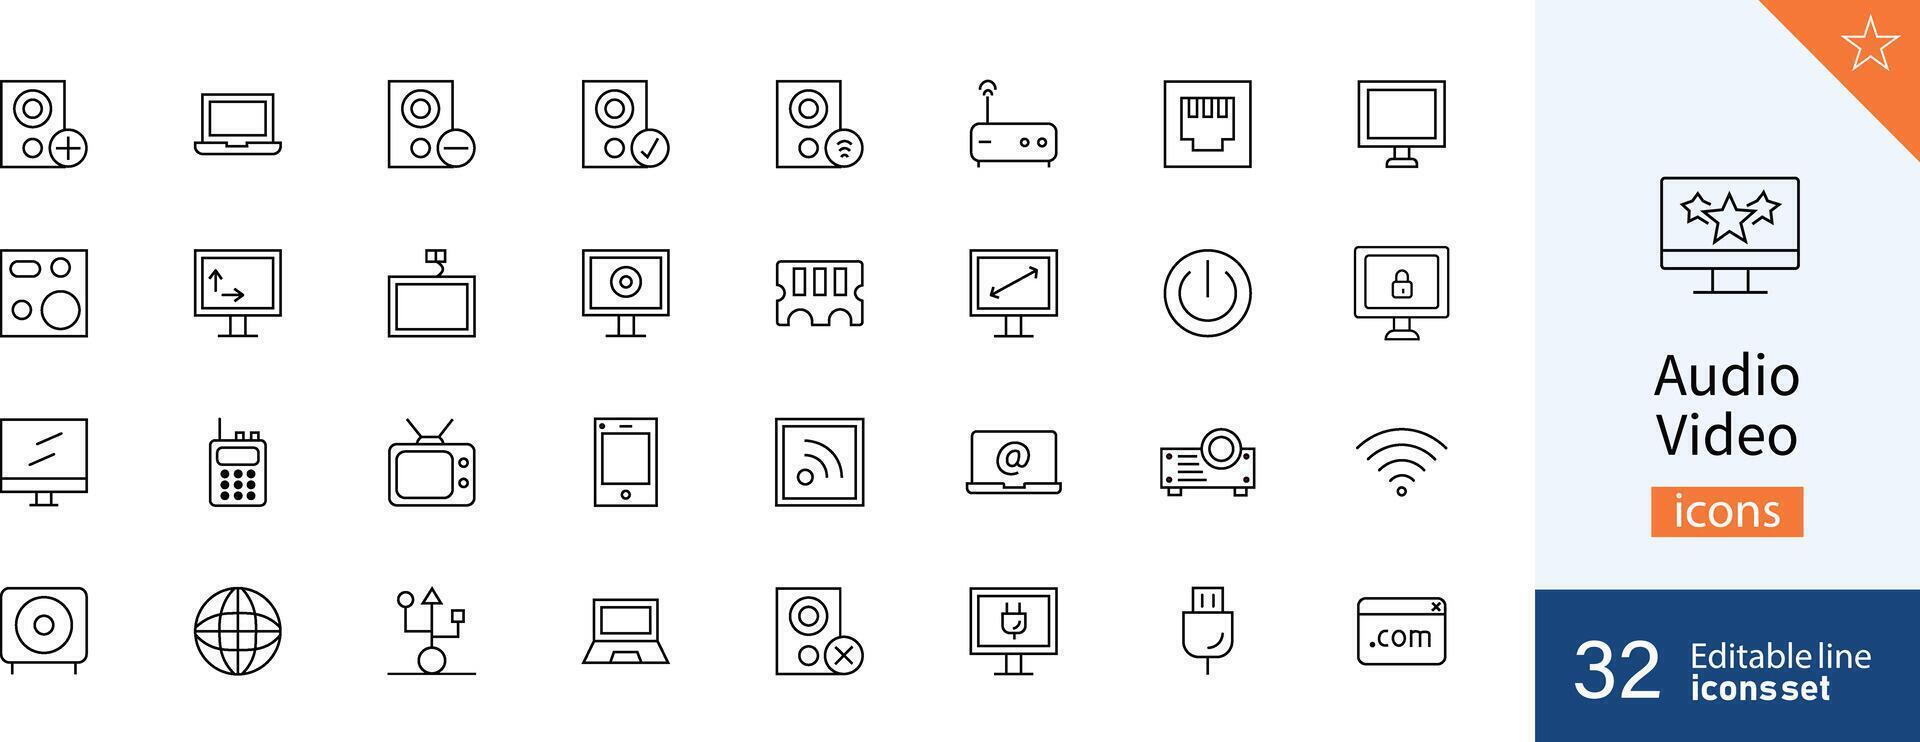 Set of 32 Audio and Video web icons in line style. Audio, video, icon, thin, line, flat. Vector illustration.